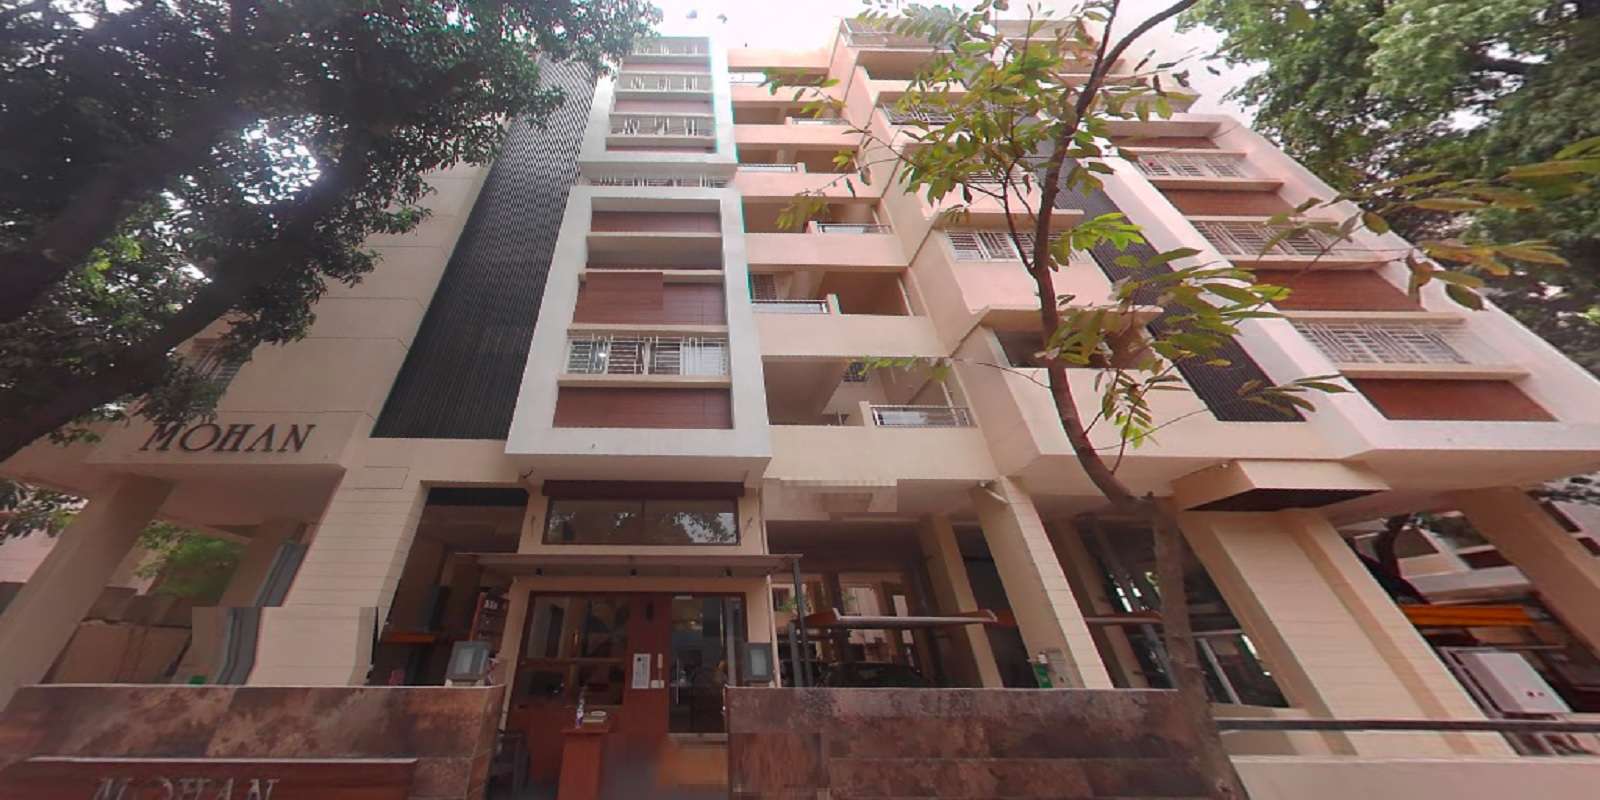 Archway Mohan Apartment Cover Image